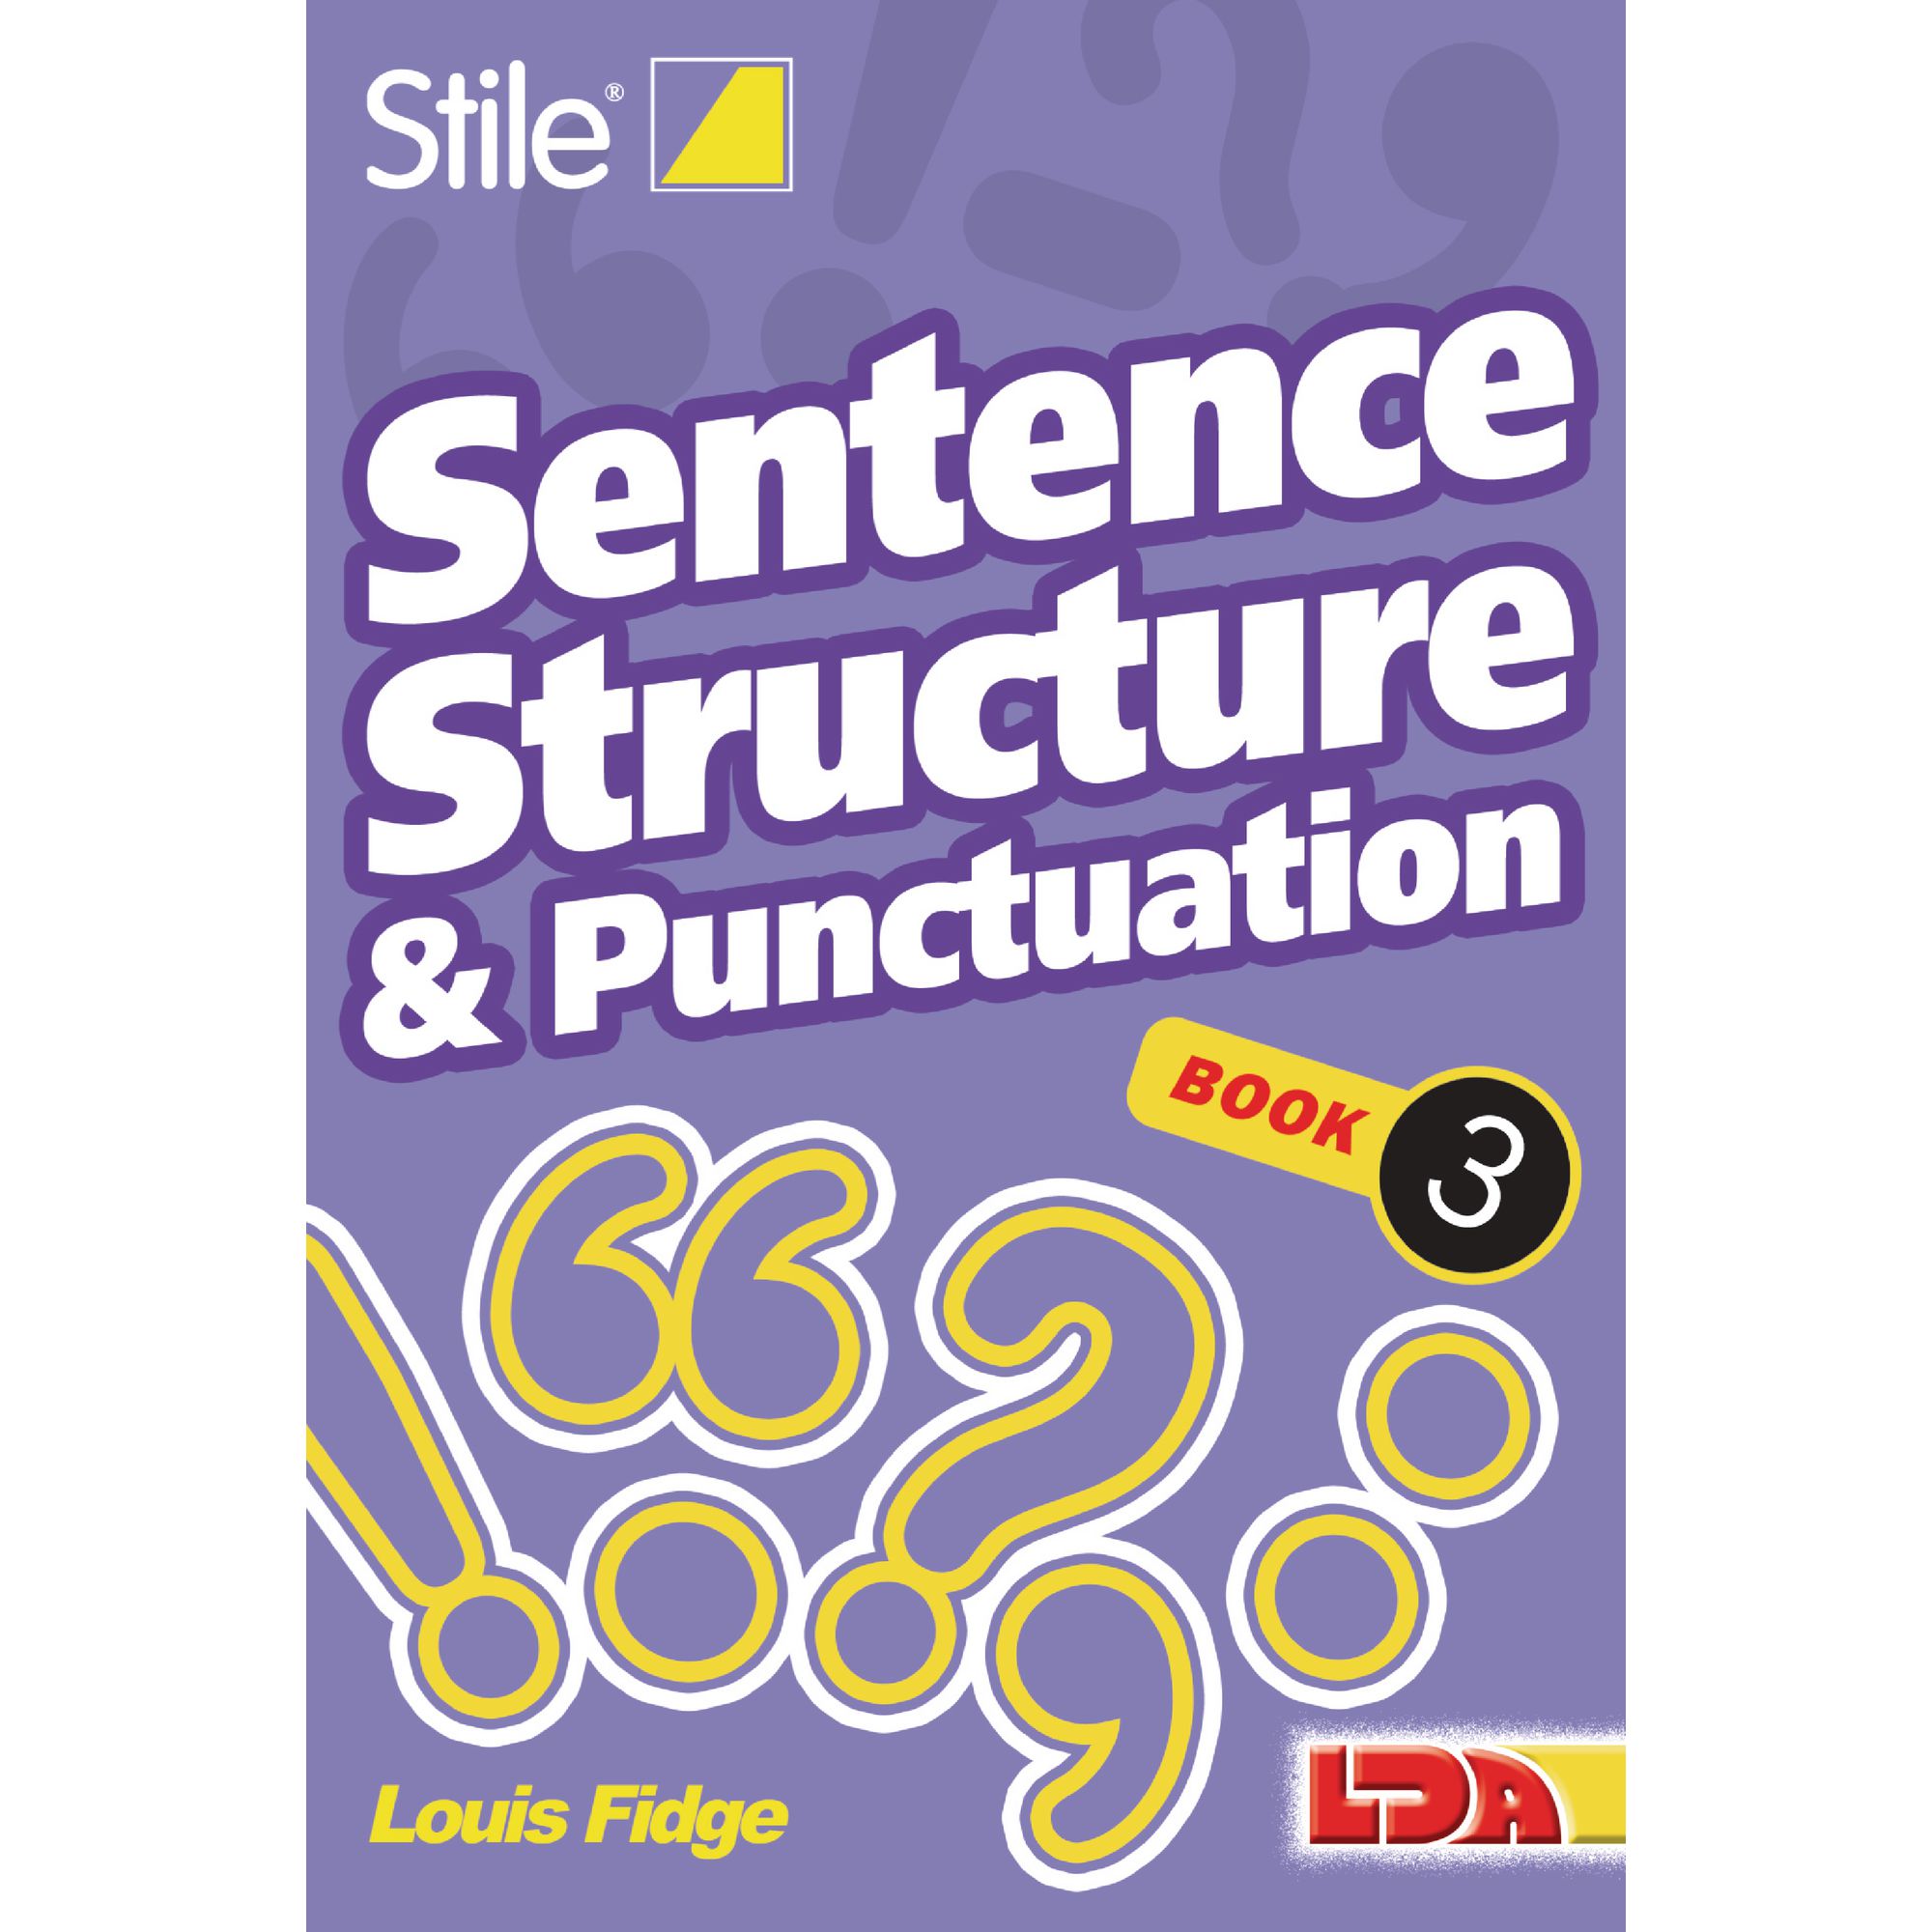 acmt13058-stile-sentence-structure-and-punctuation-book-3-gls-educational-supplies